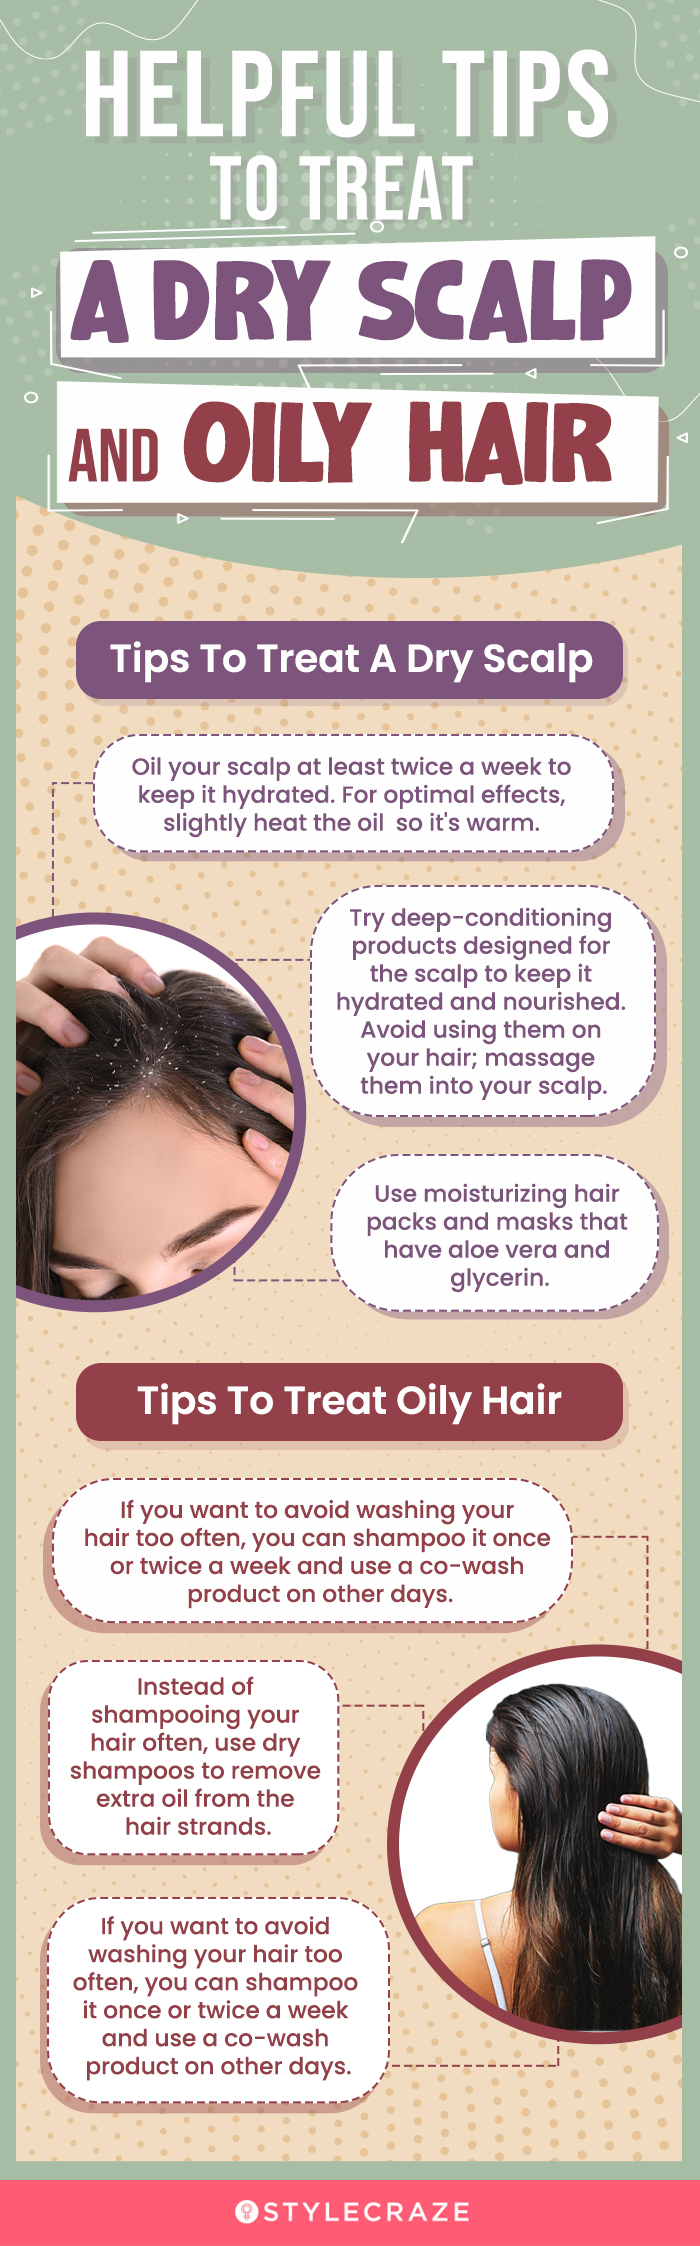 helpful tips to treat a dry scalp and oily hair (infographic)